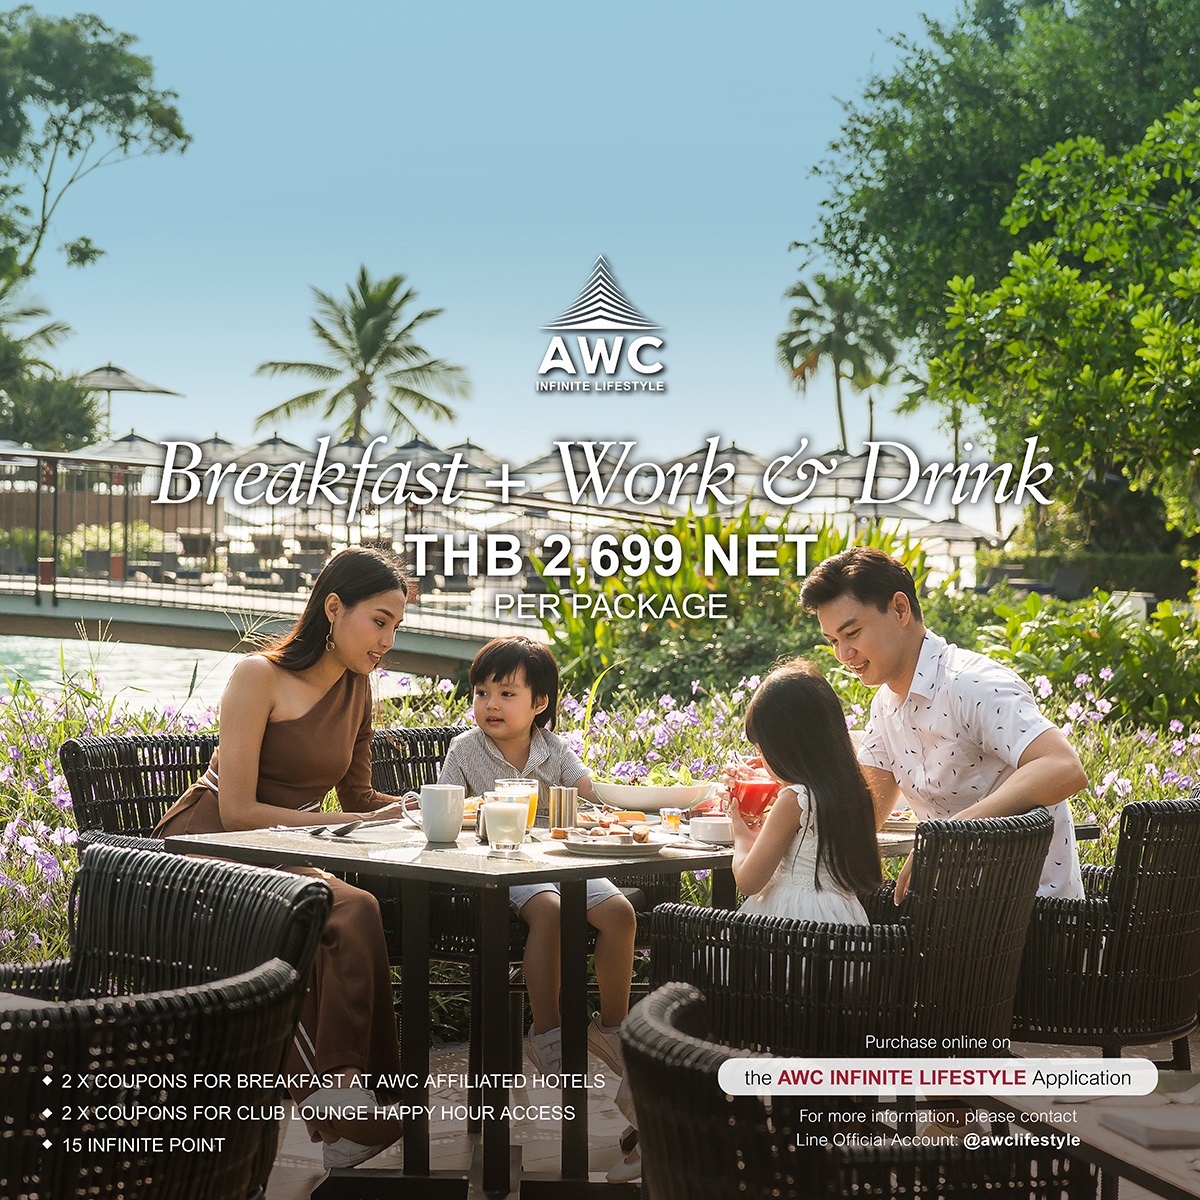 AWC launches exclusive Happy Hour Club Lounge Package offering 3 Packages for 3 Lifestyles for work and leisure from leading hotels and resorts across